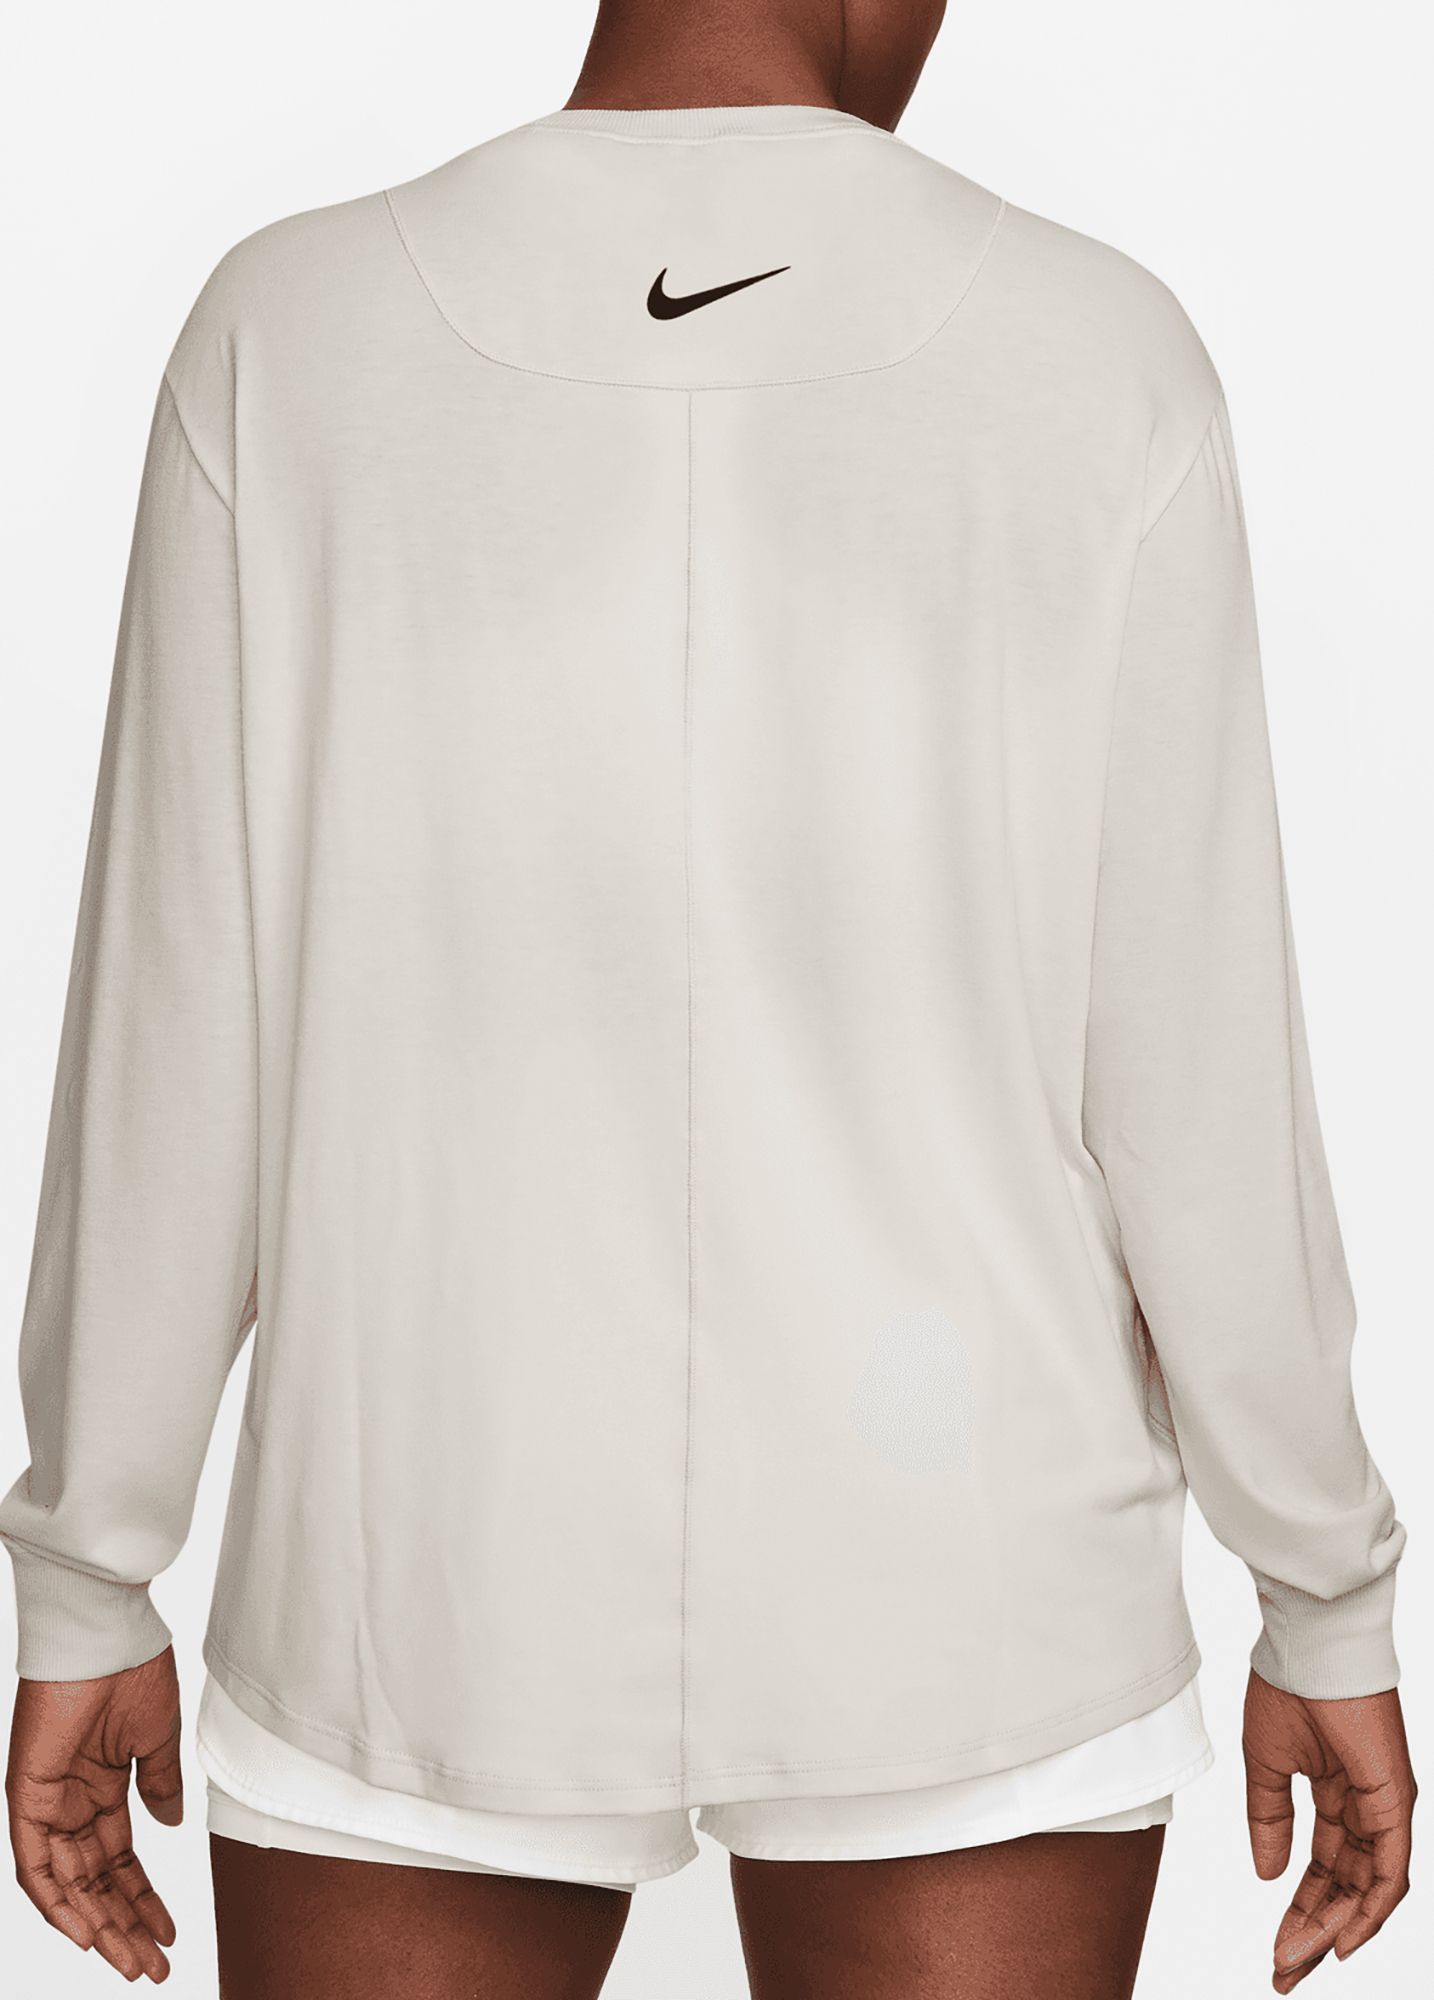 Nike Women's One Relaxed Dri-FIT Long-Sleeve Top